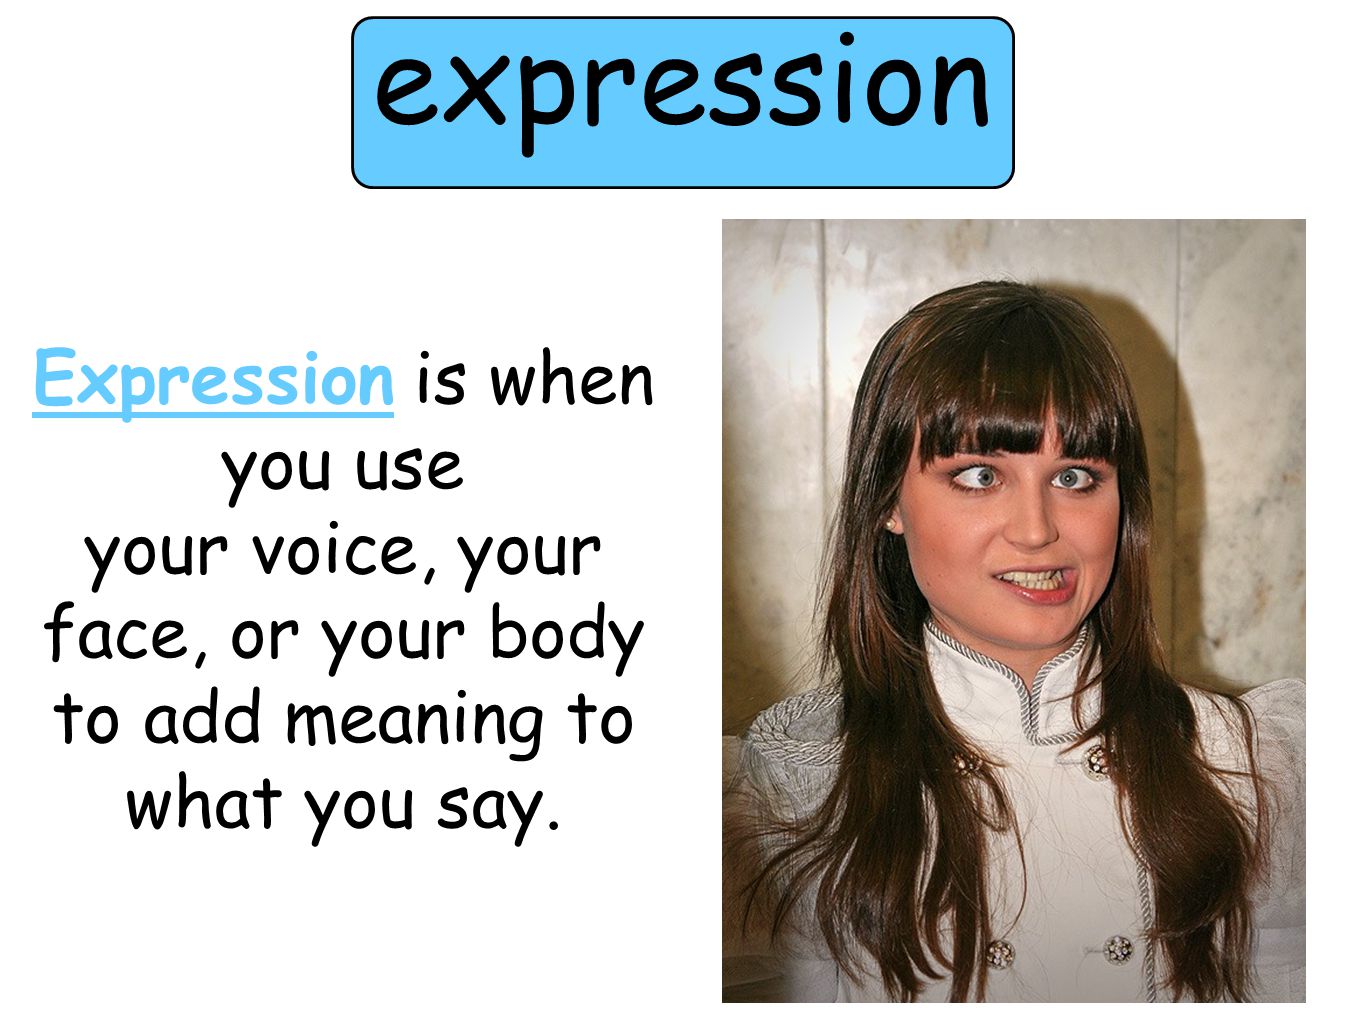 expression Expression is when you use your voice, your face, or your body to add meaning to what you say.